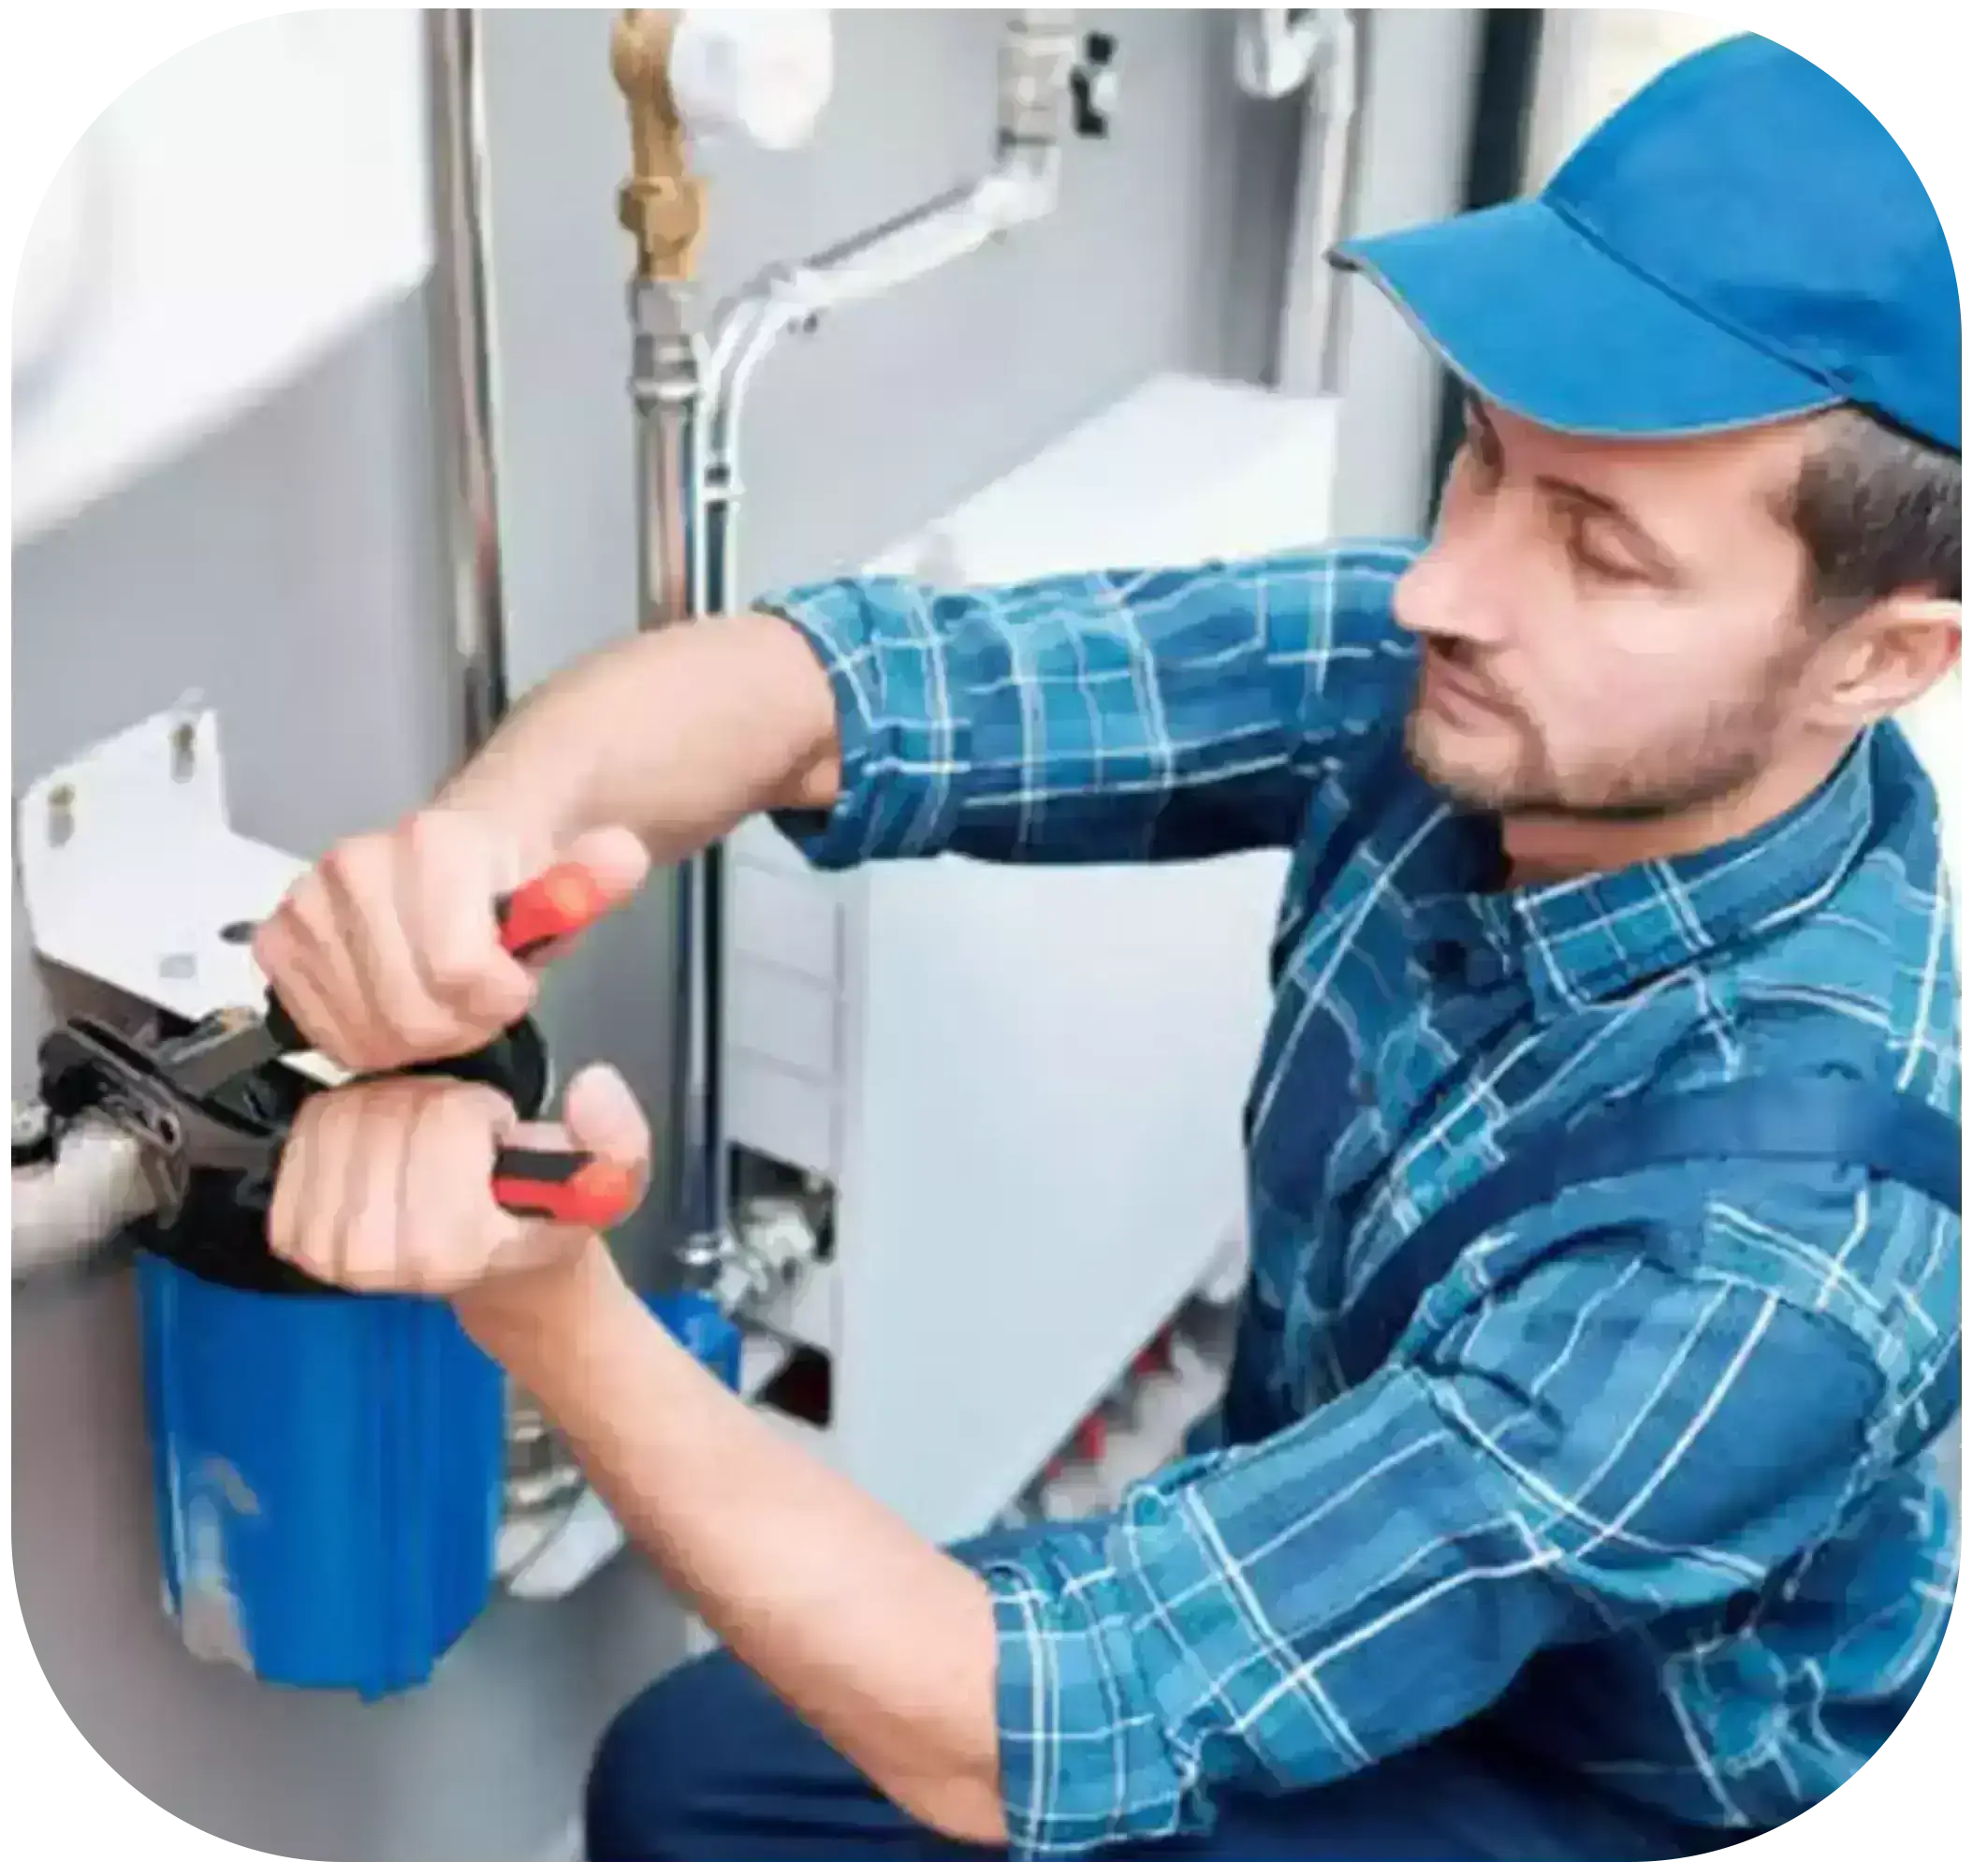 A technician in a blue shirt and pants with a blue cap is repairing a blue RO water purifier using water pipe pliers.